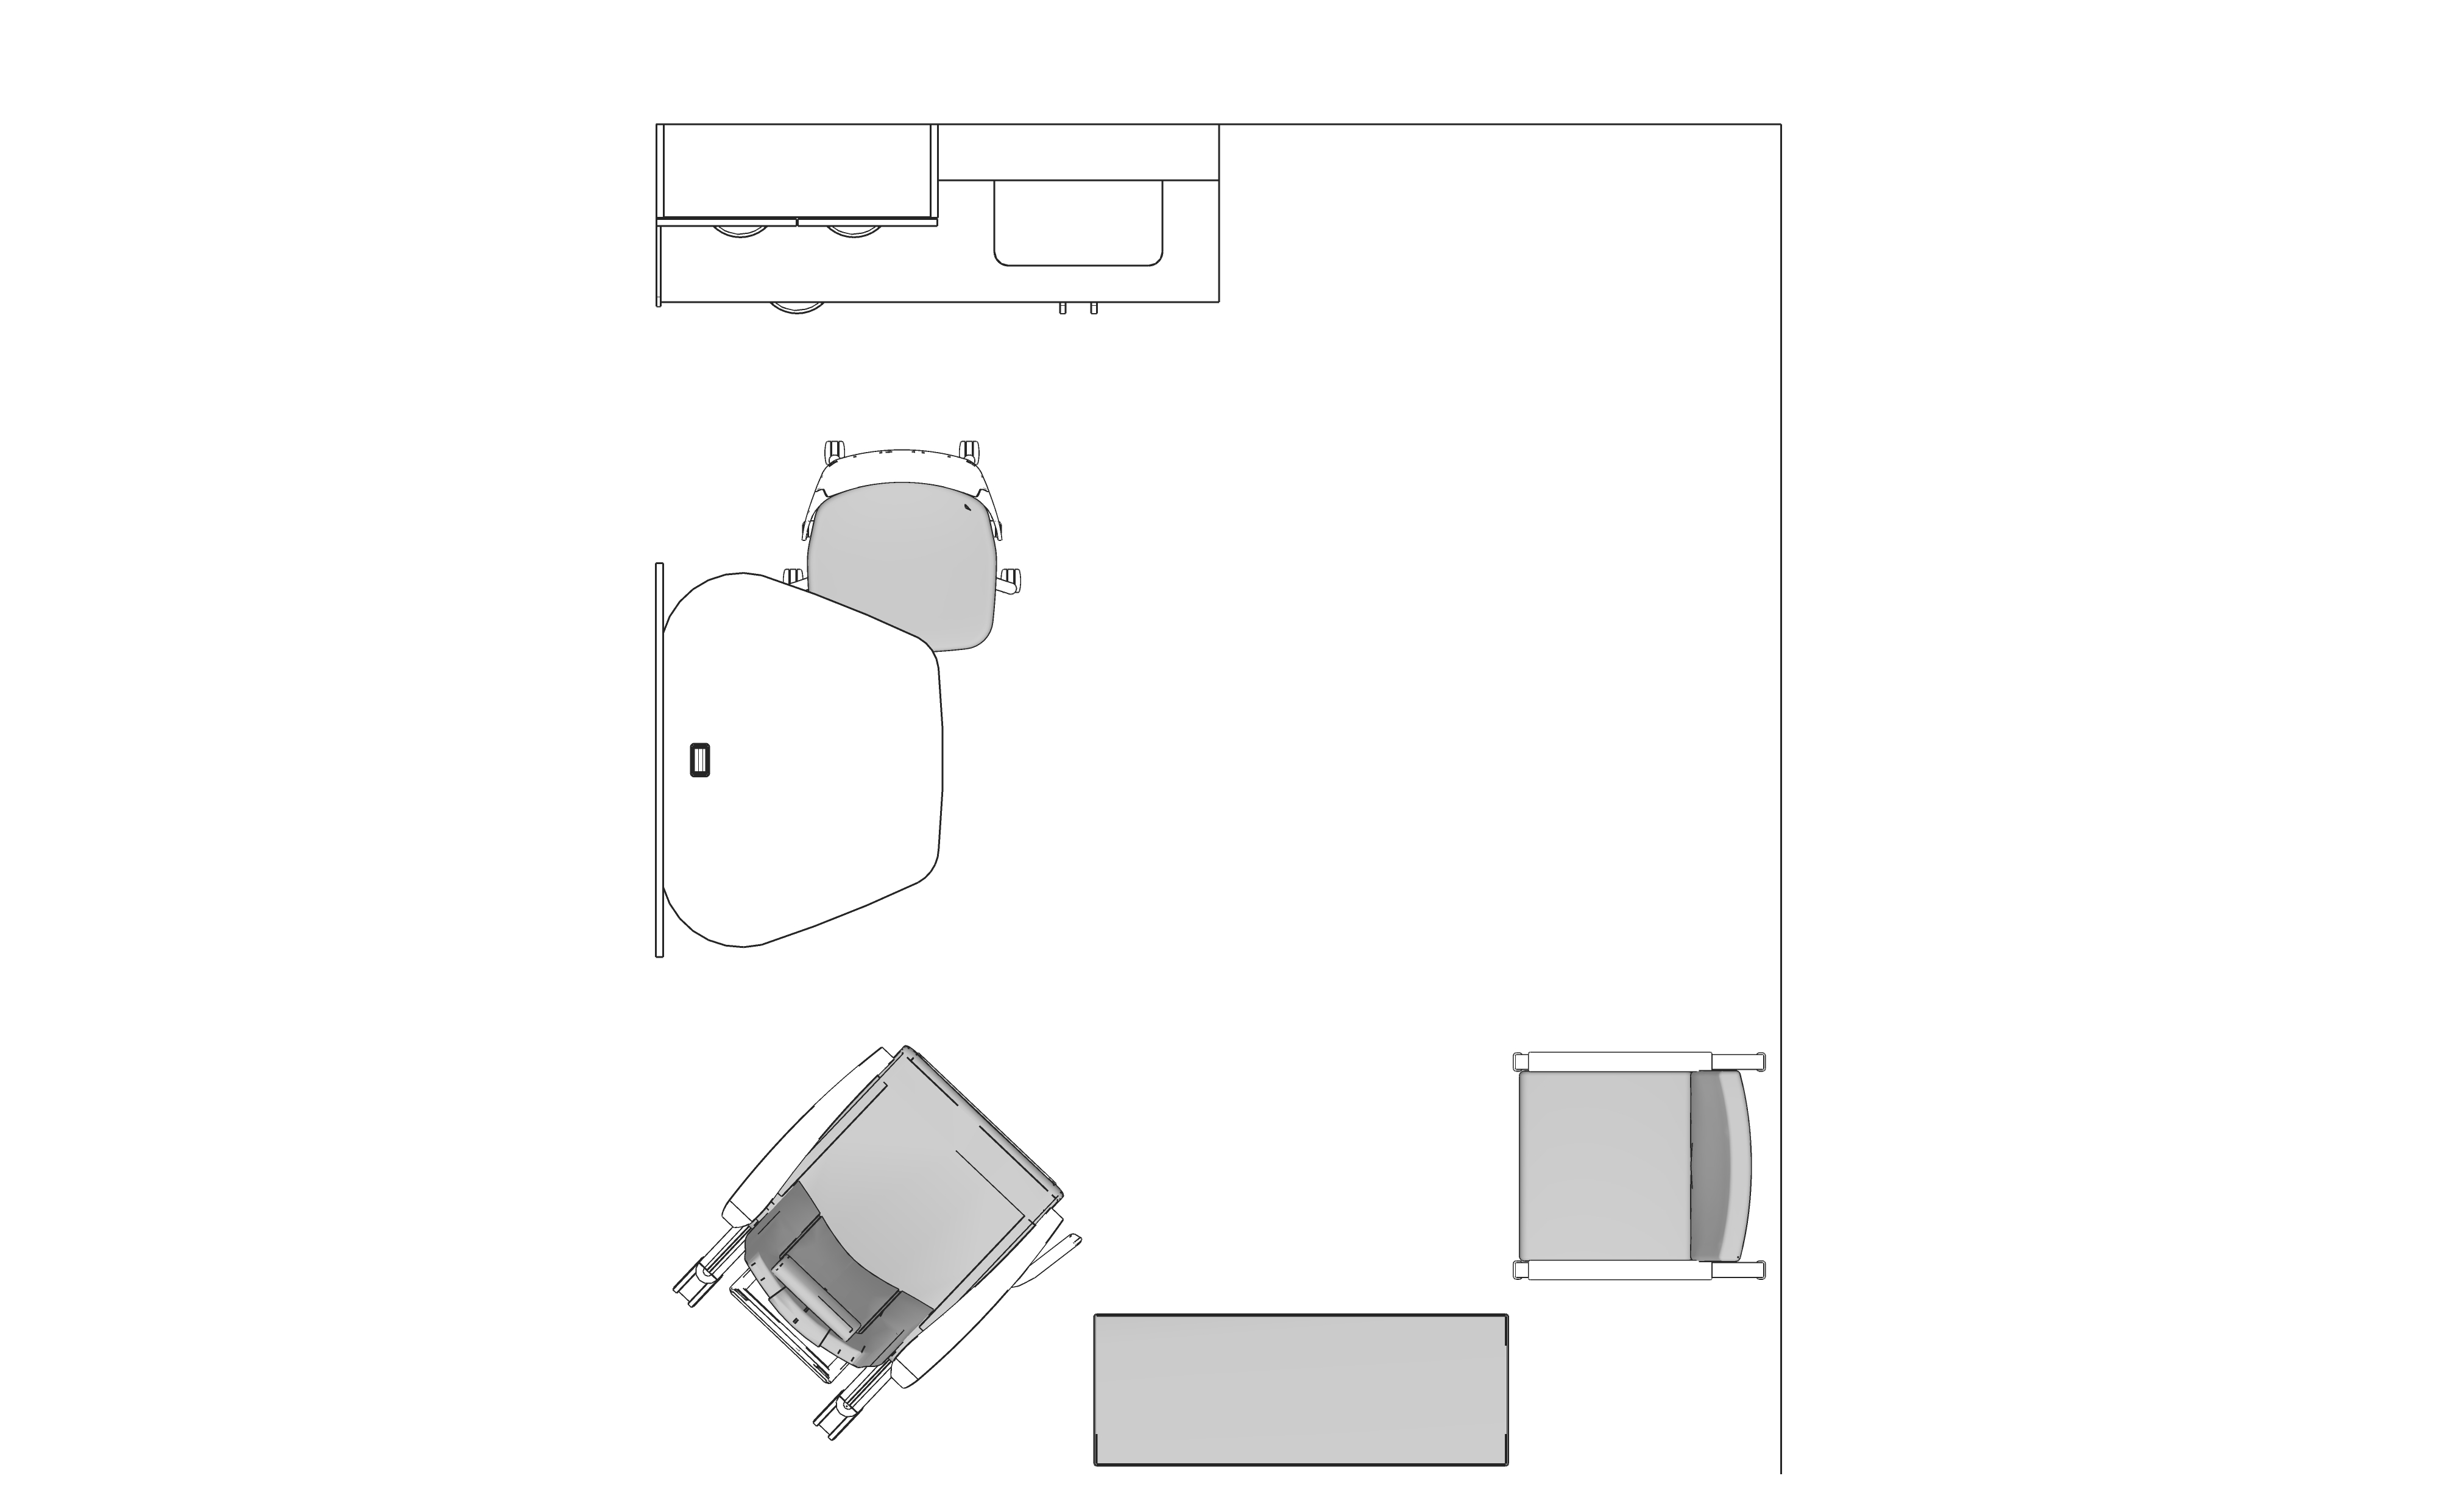 A line drawing viewed from above - Exam Room 020